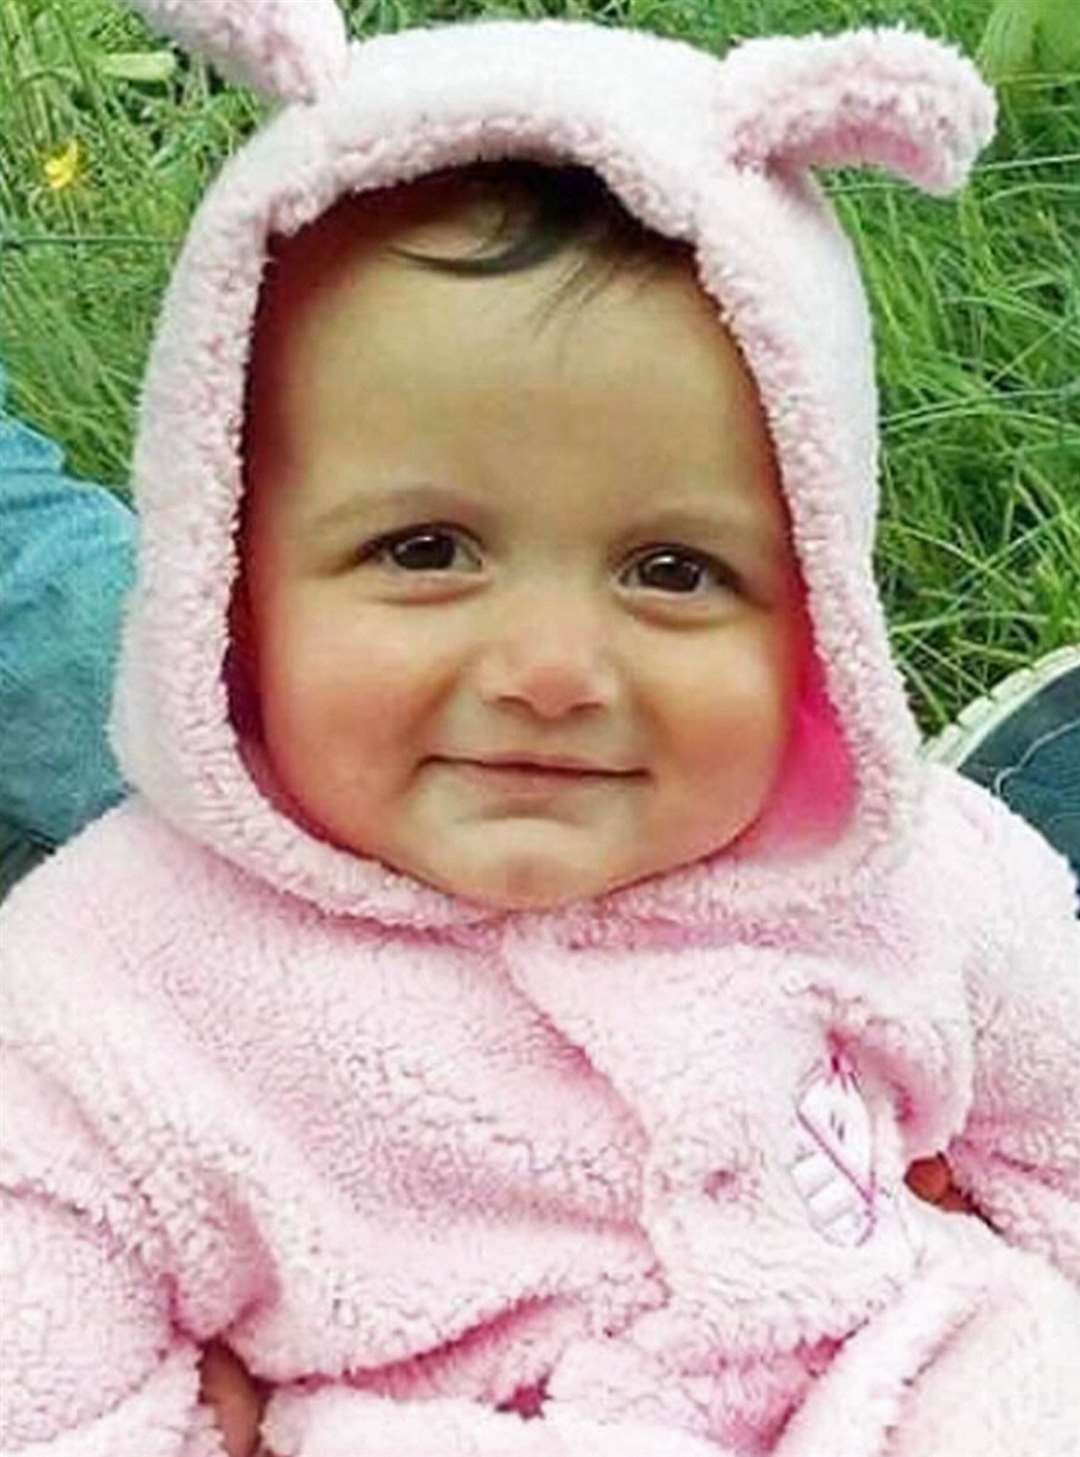 Sabrina Gossett’s 15-month-old daughter Morgana Quinn also died in the fire (PSNI/PA)